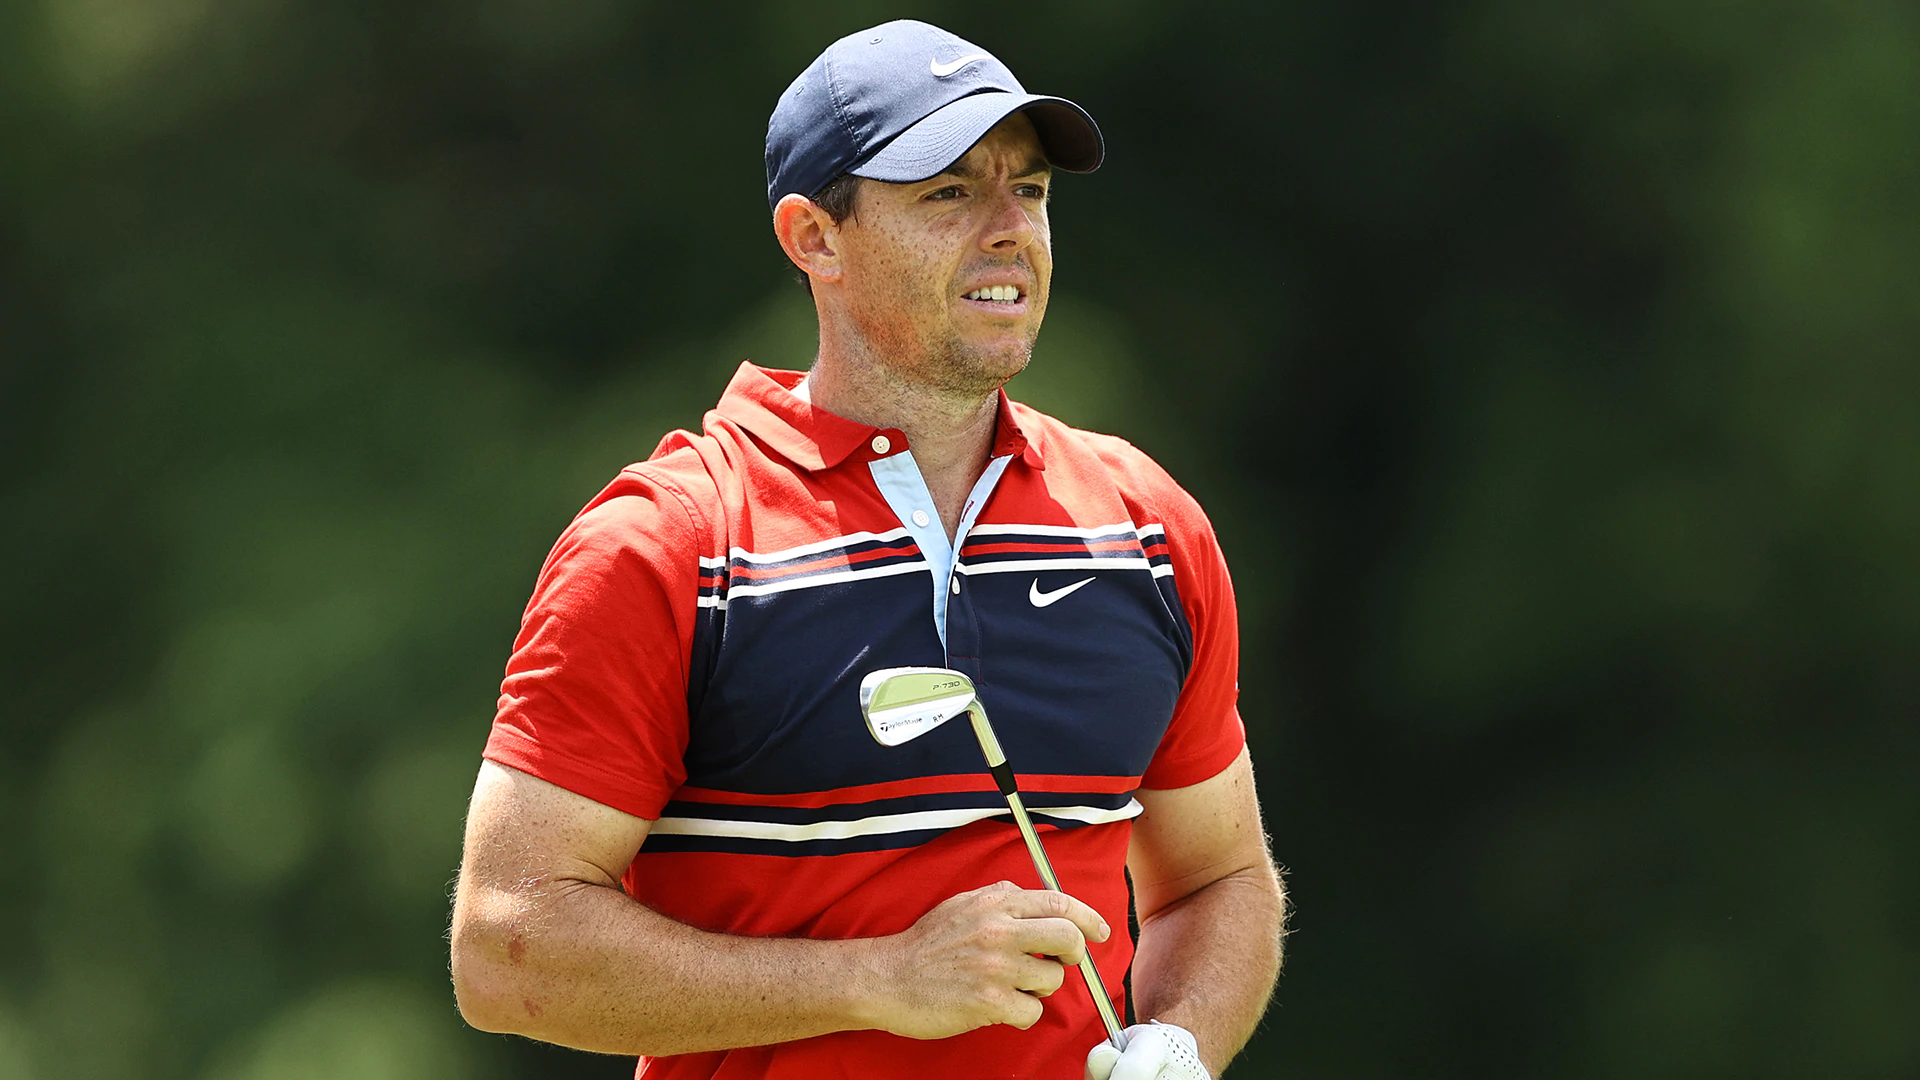 Rory McIlroy: ‘I completely understand’ players deciding not to travel